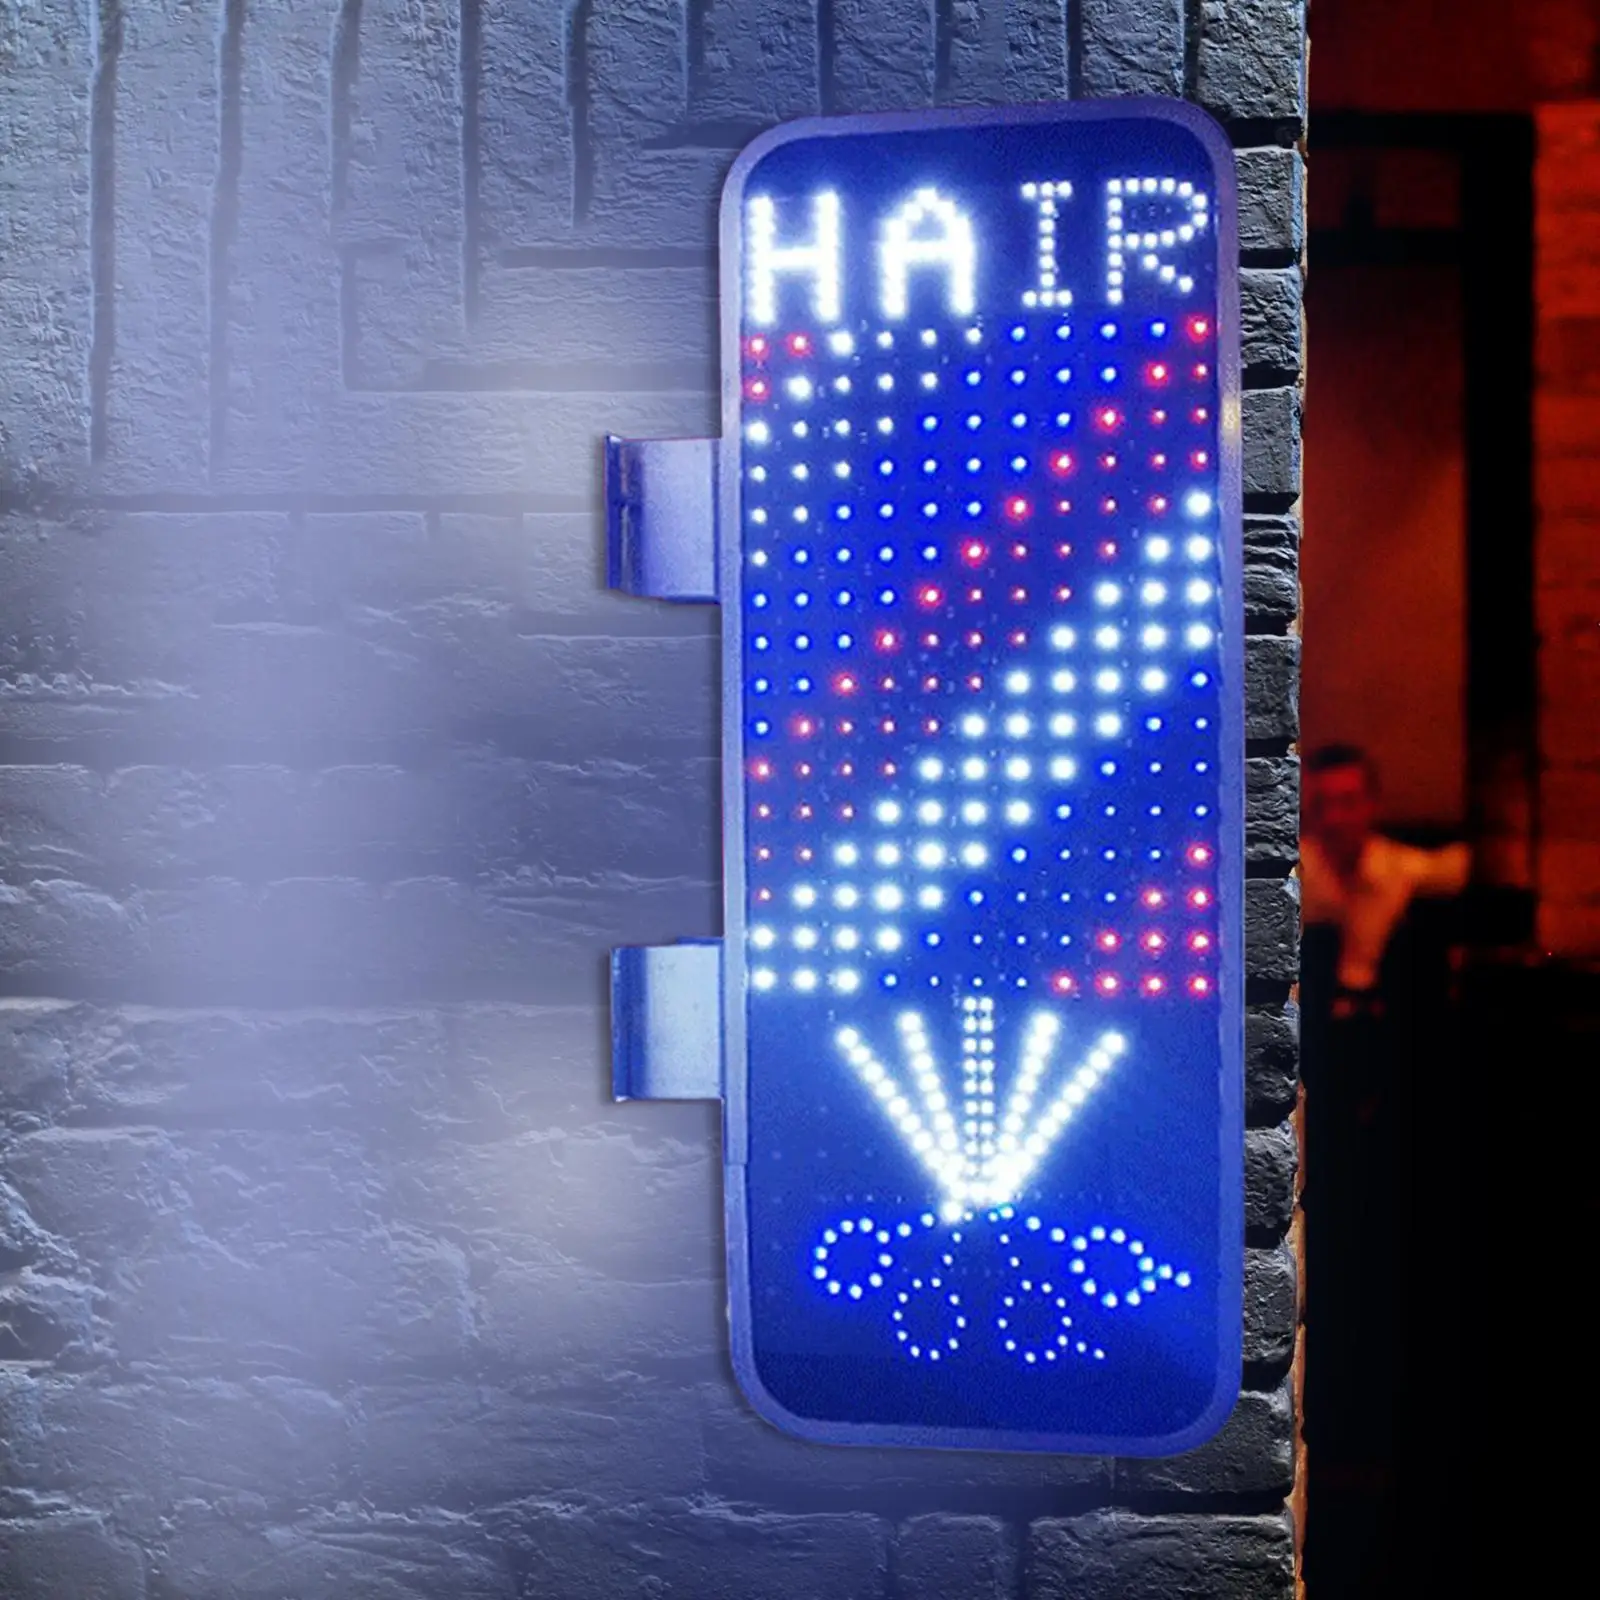 Barber Shop Sign Rotating Stripes Lights Red Blue White Neon Signs Outdoor Wall Mounted Novelty Lighting Pole LED Light